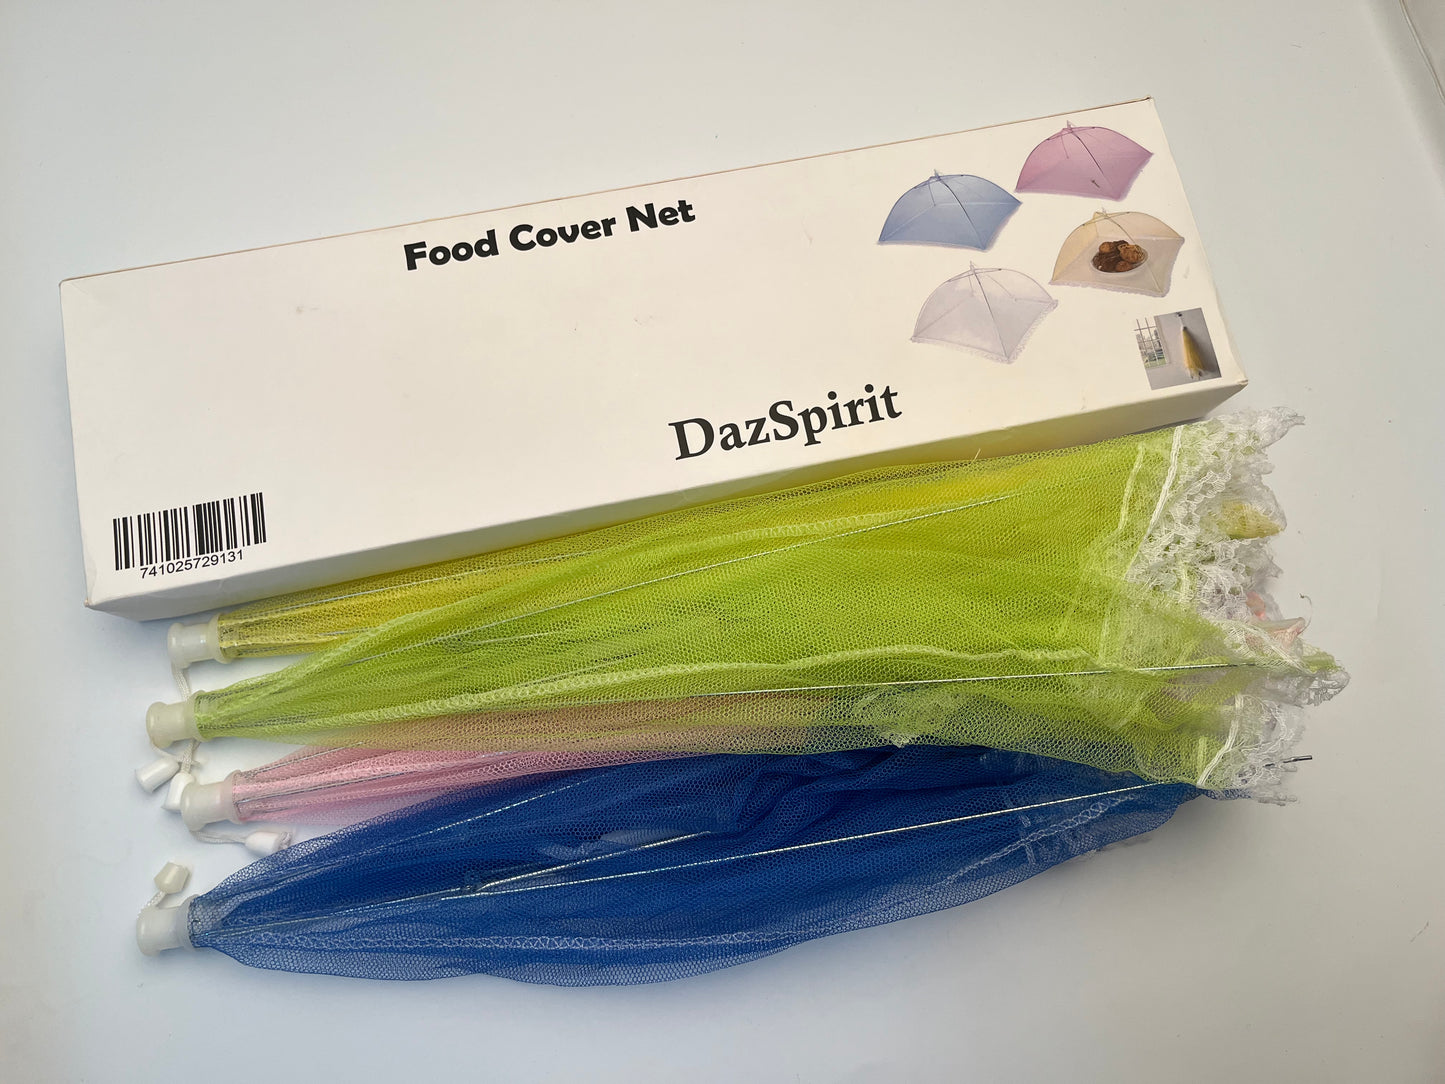 DazSpirit Pop-Up Mesh Food Covers Tent Umbrella 4 Pack Large 17 inch Reusable and Collapsible Screen Net Protectors for Outdoors Parties Picnics BBQs